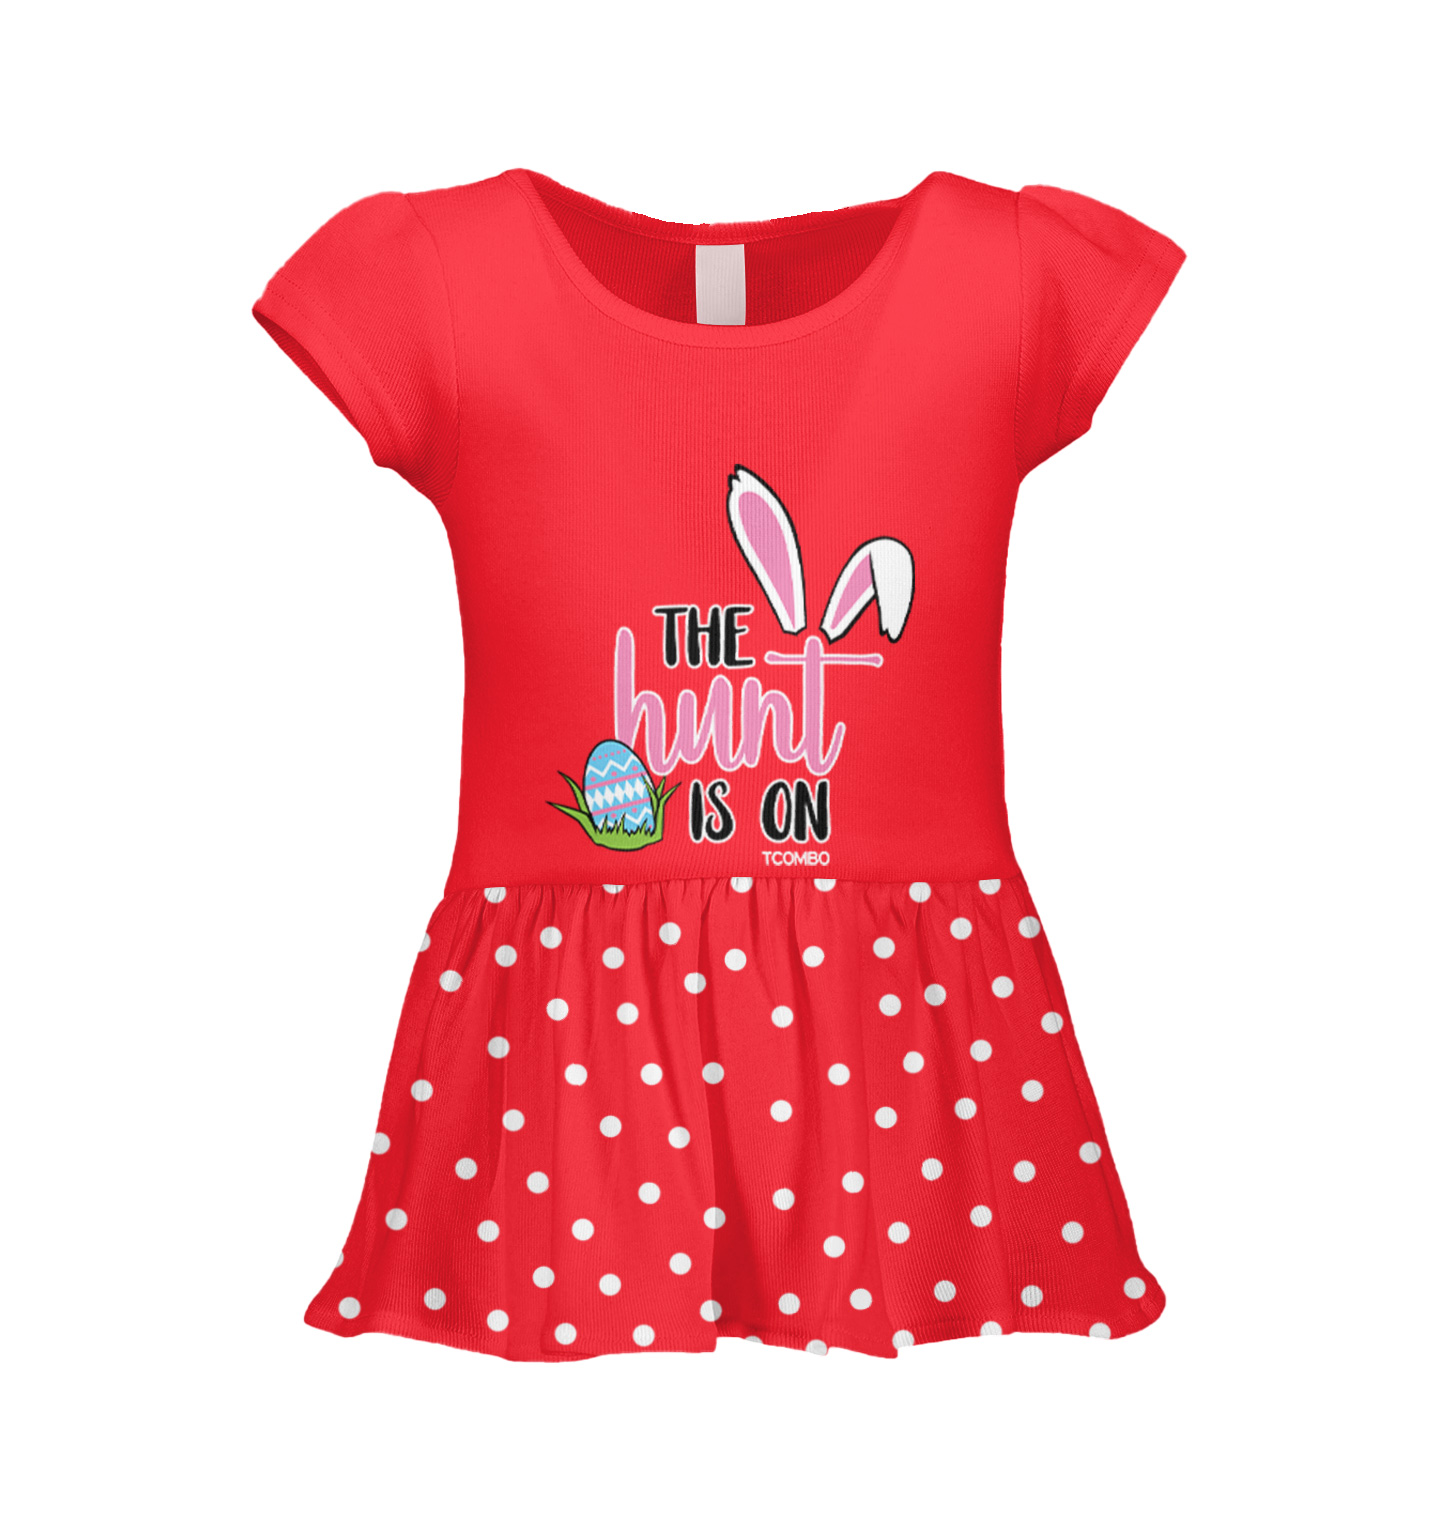 Bunny Easter Egg Infant/Toddler Cotton Jersey T-Shirt The Hunt is On 